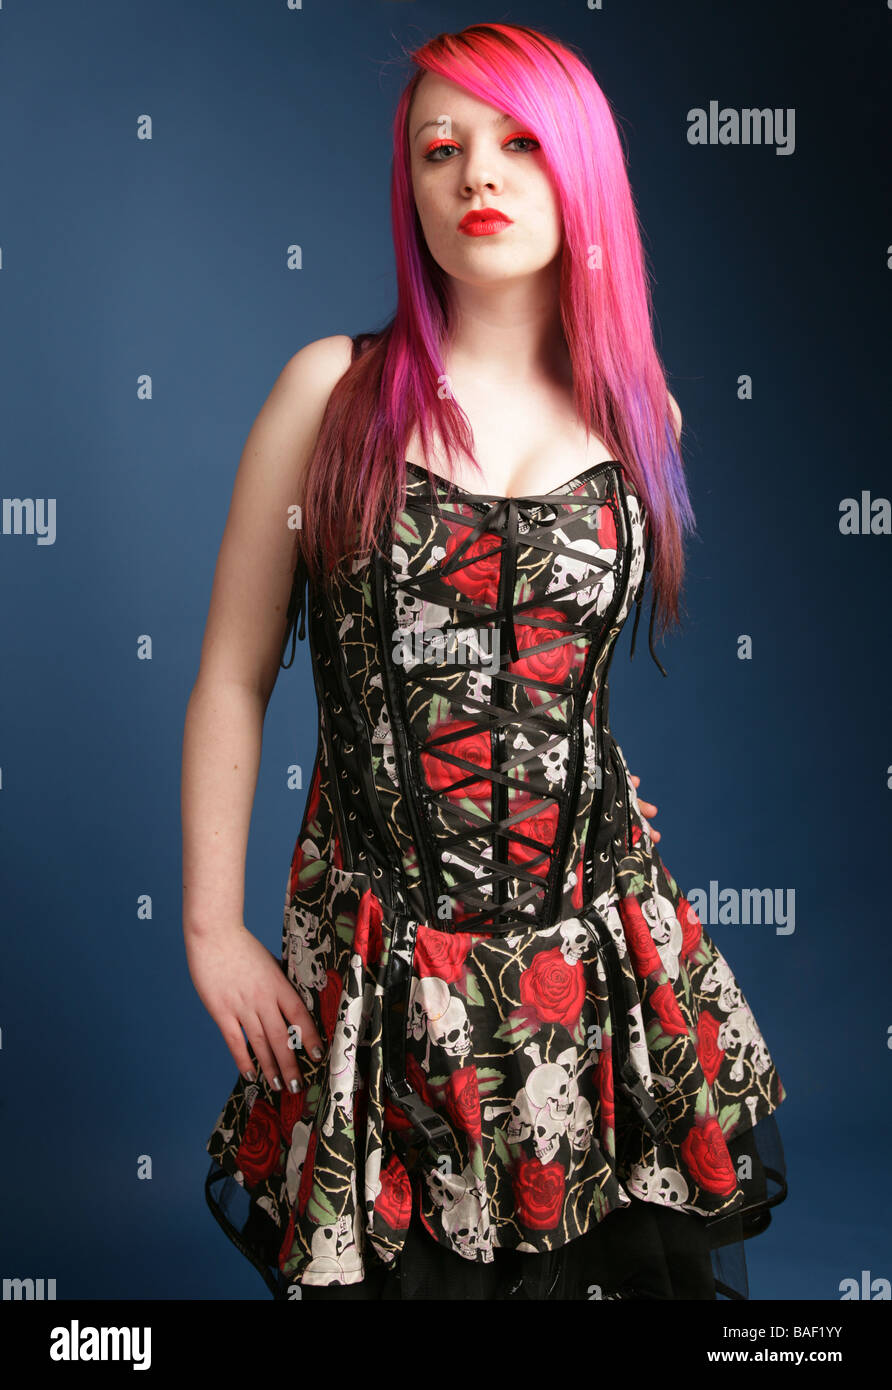 Alternative looking teen with bright pink hair red lips and pale skin standing with a hand on her hip Stock Photo